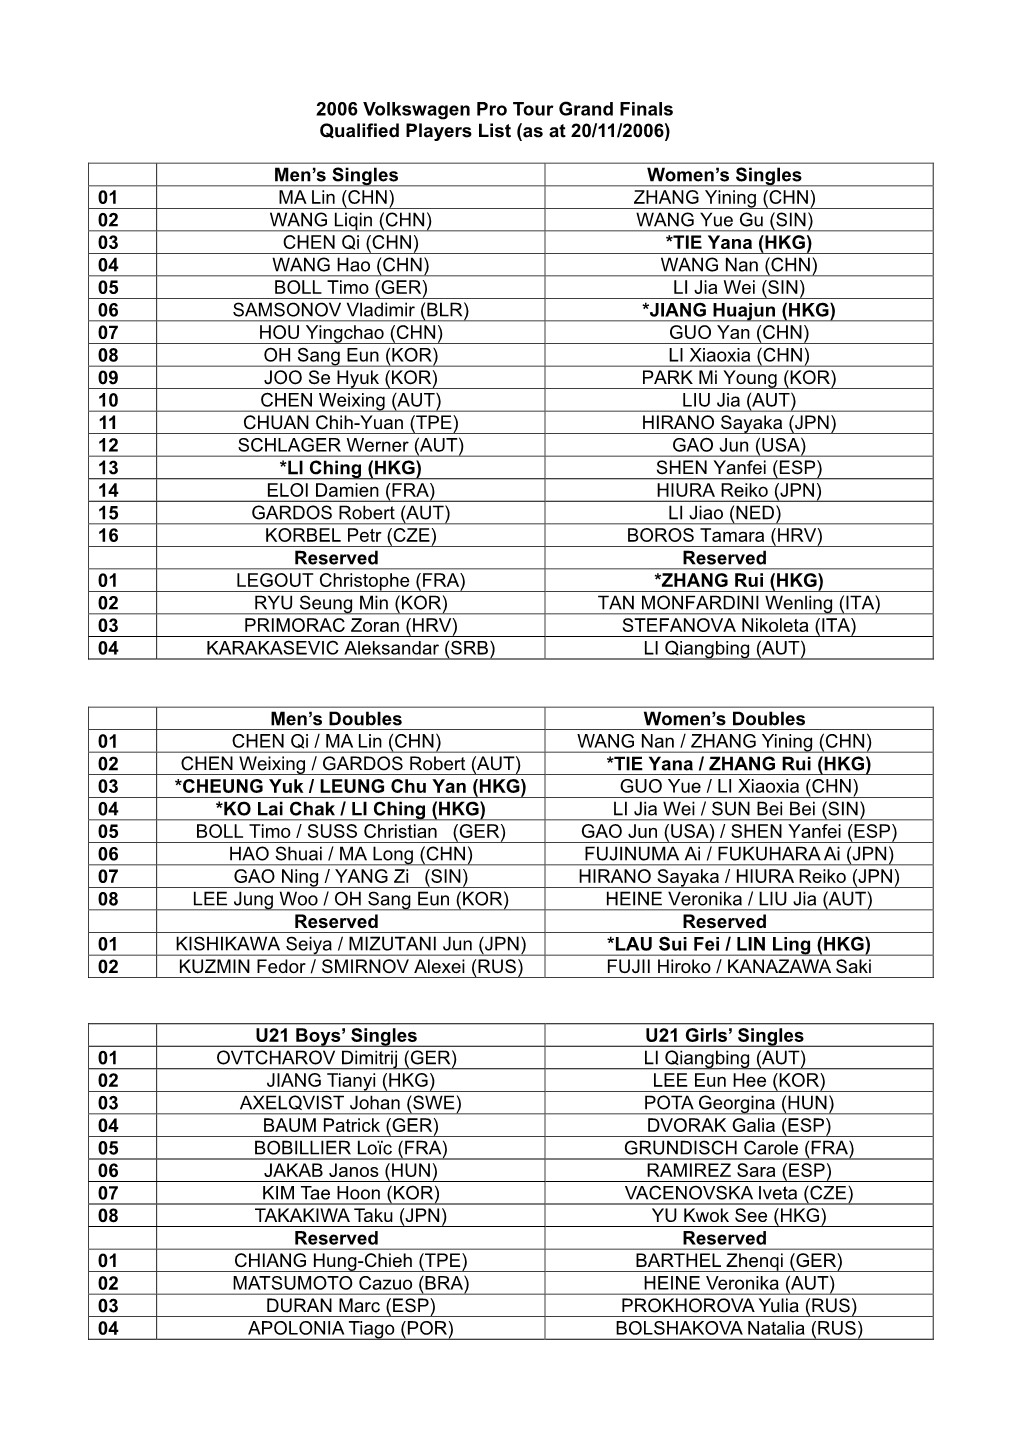 2006 Volkswagen Pro Tour Grand Finals Qualified Players List (As at 20/11/2006)